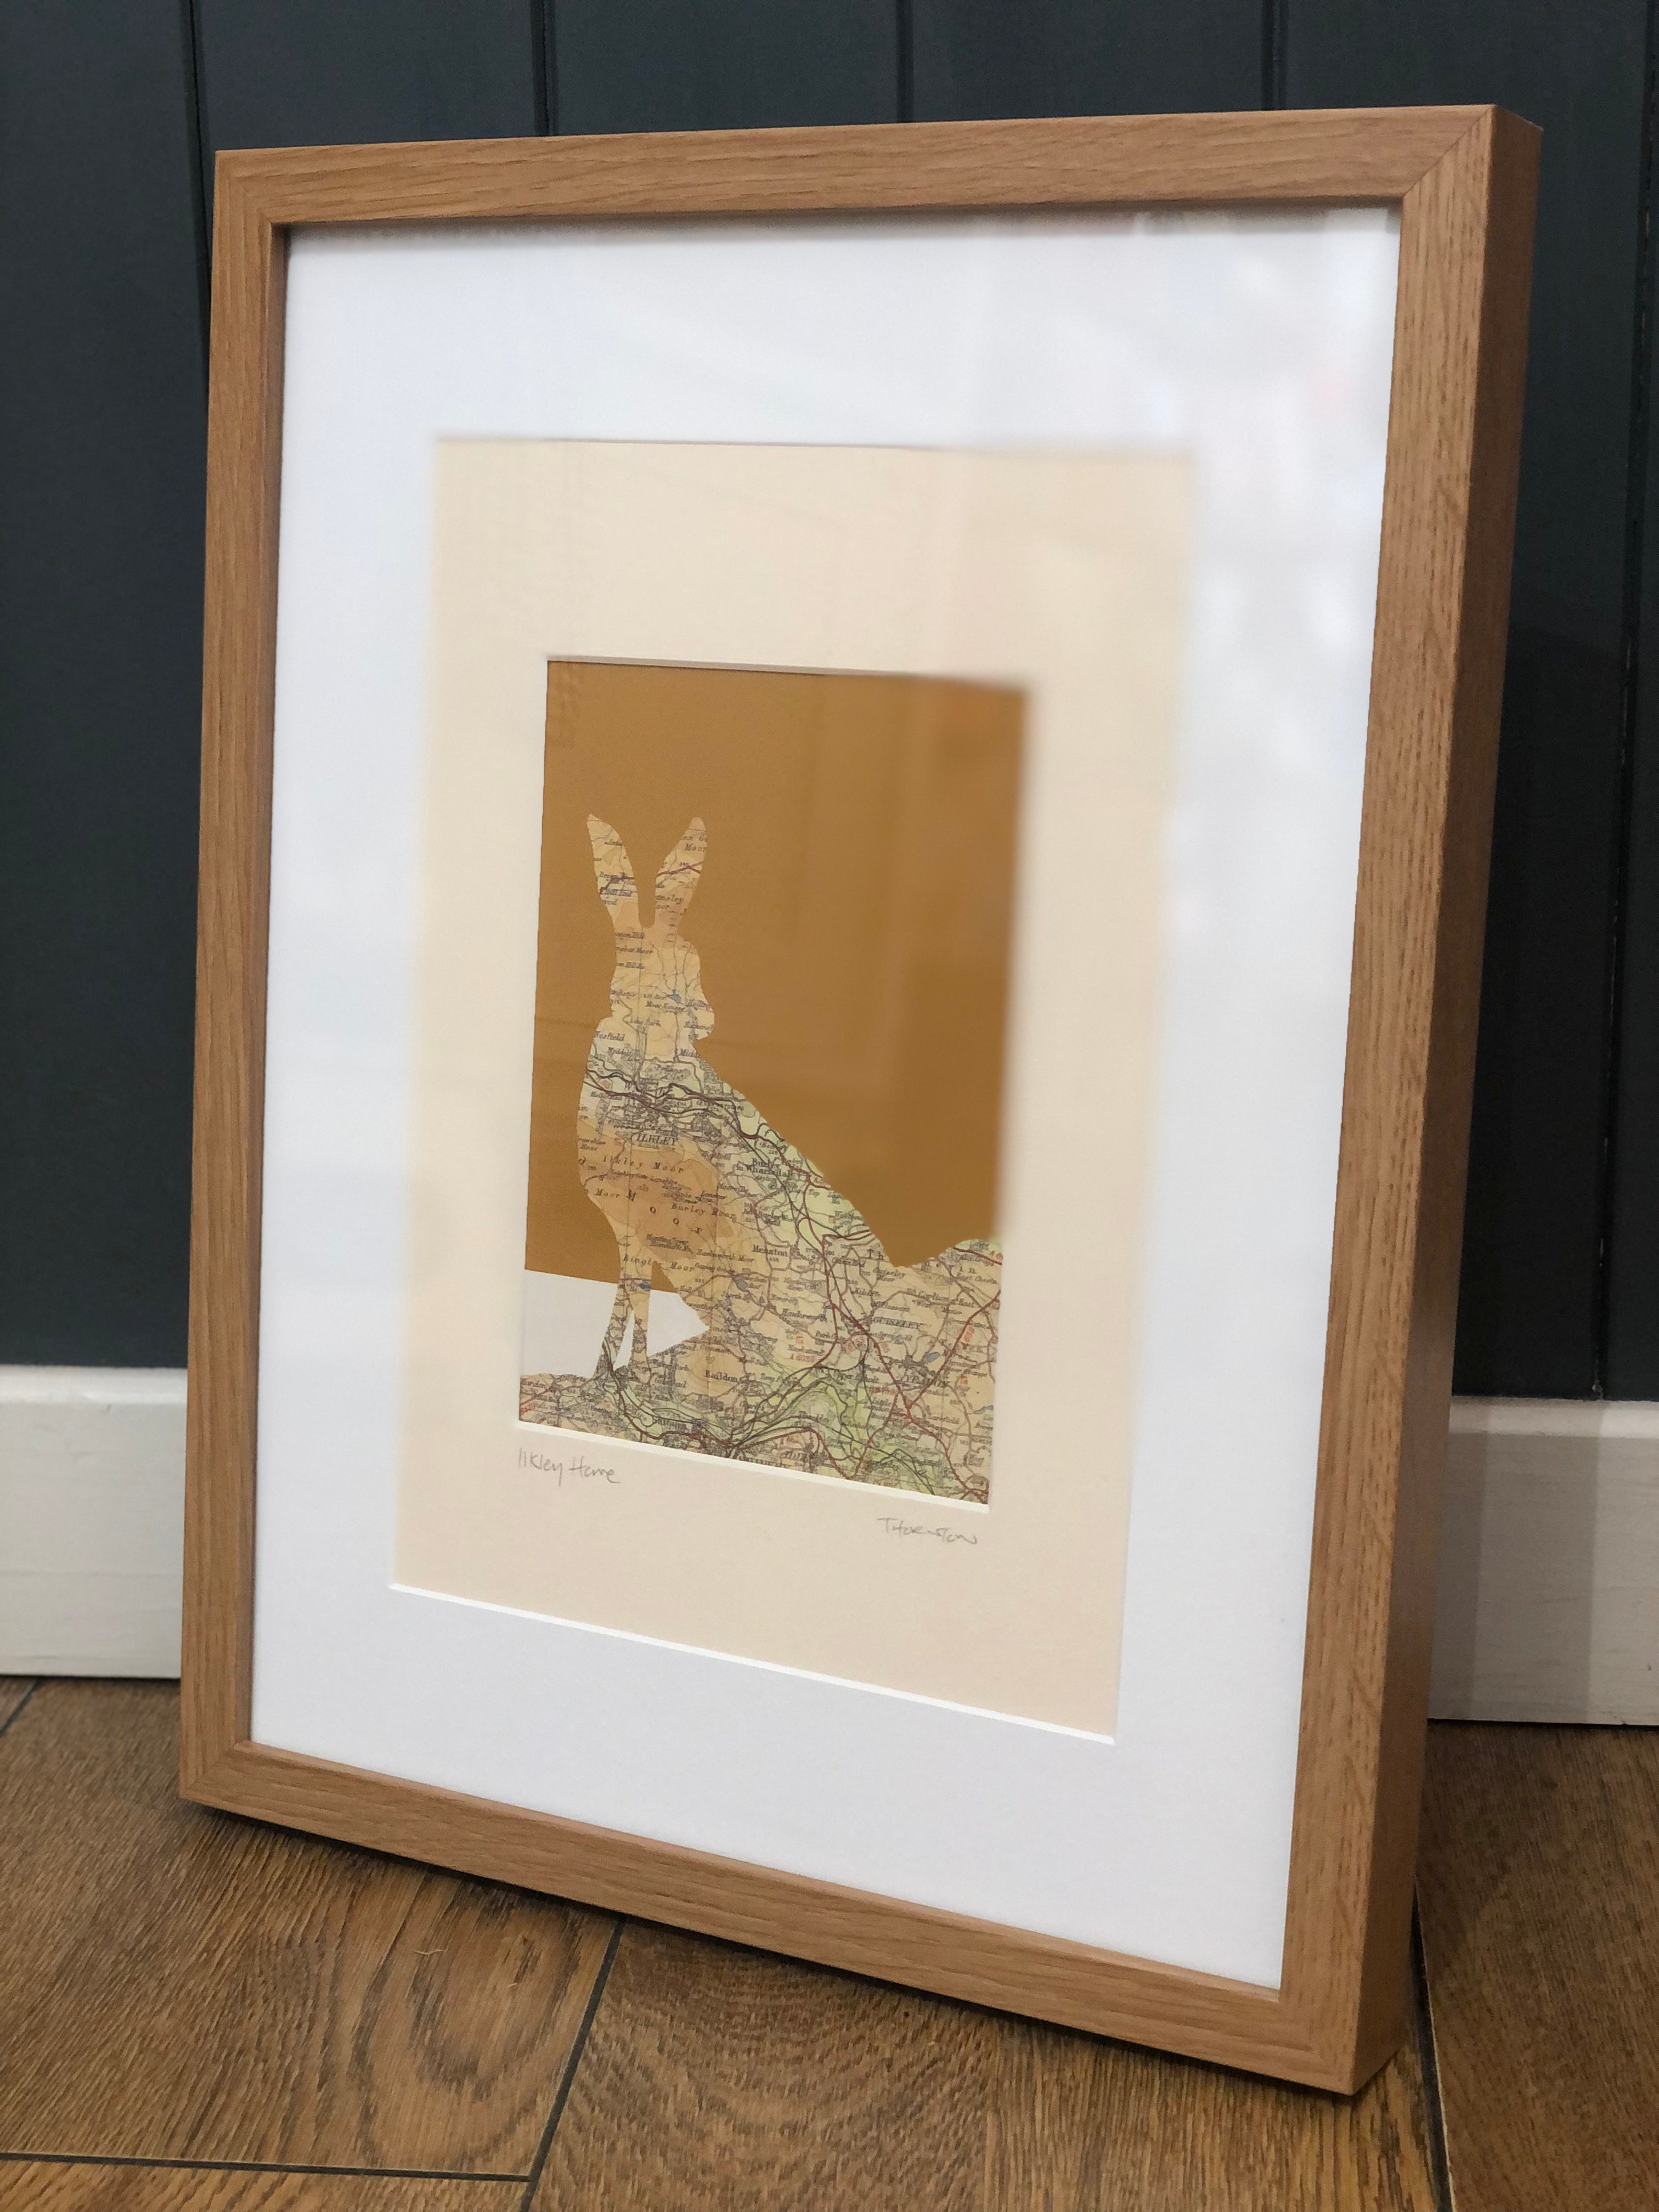 Framed Ilkley Hare Picture